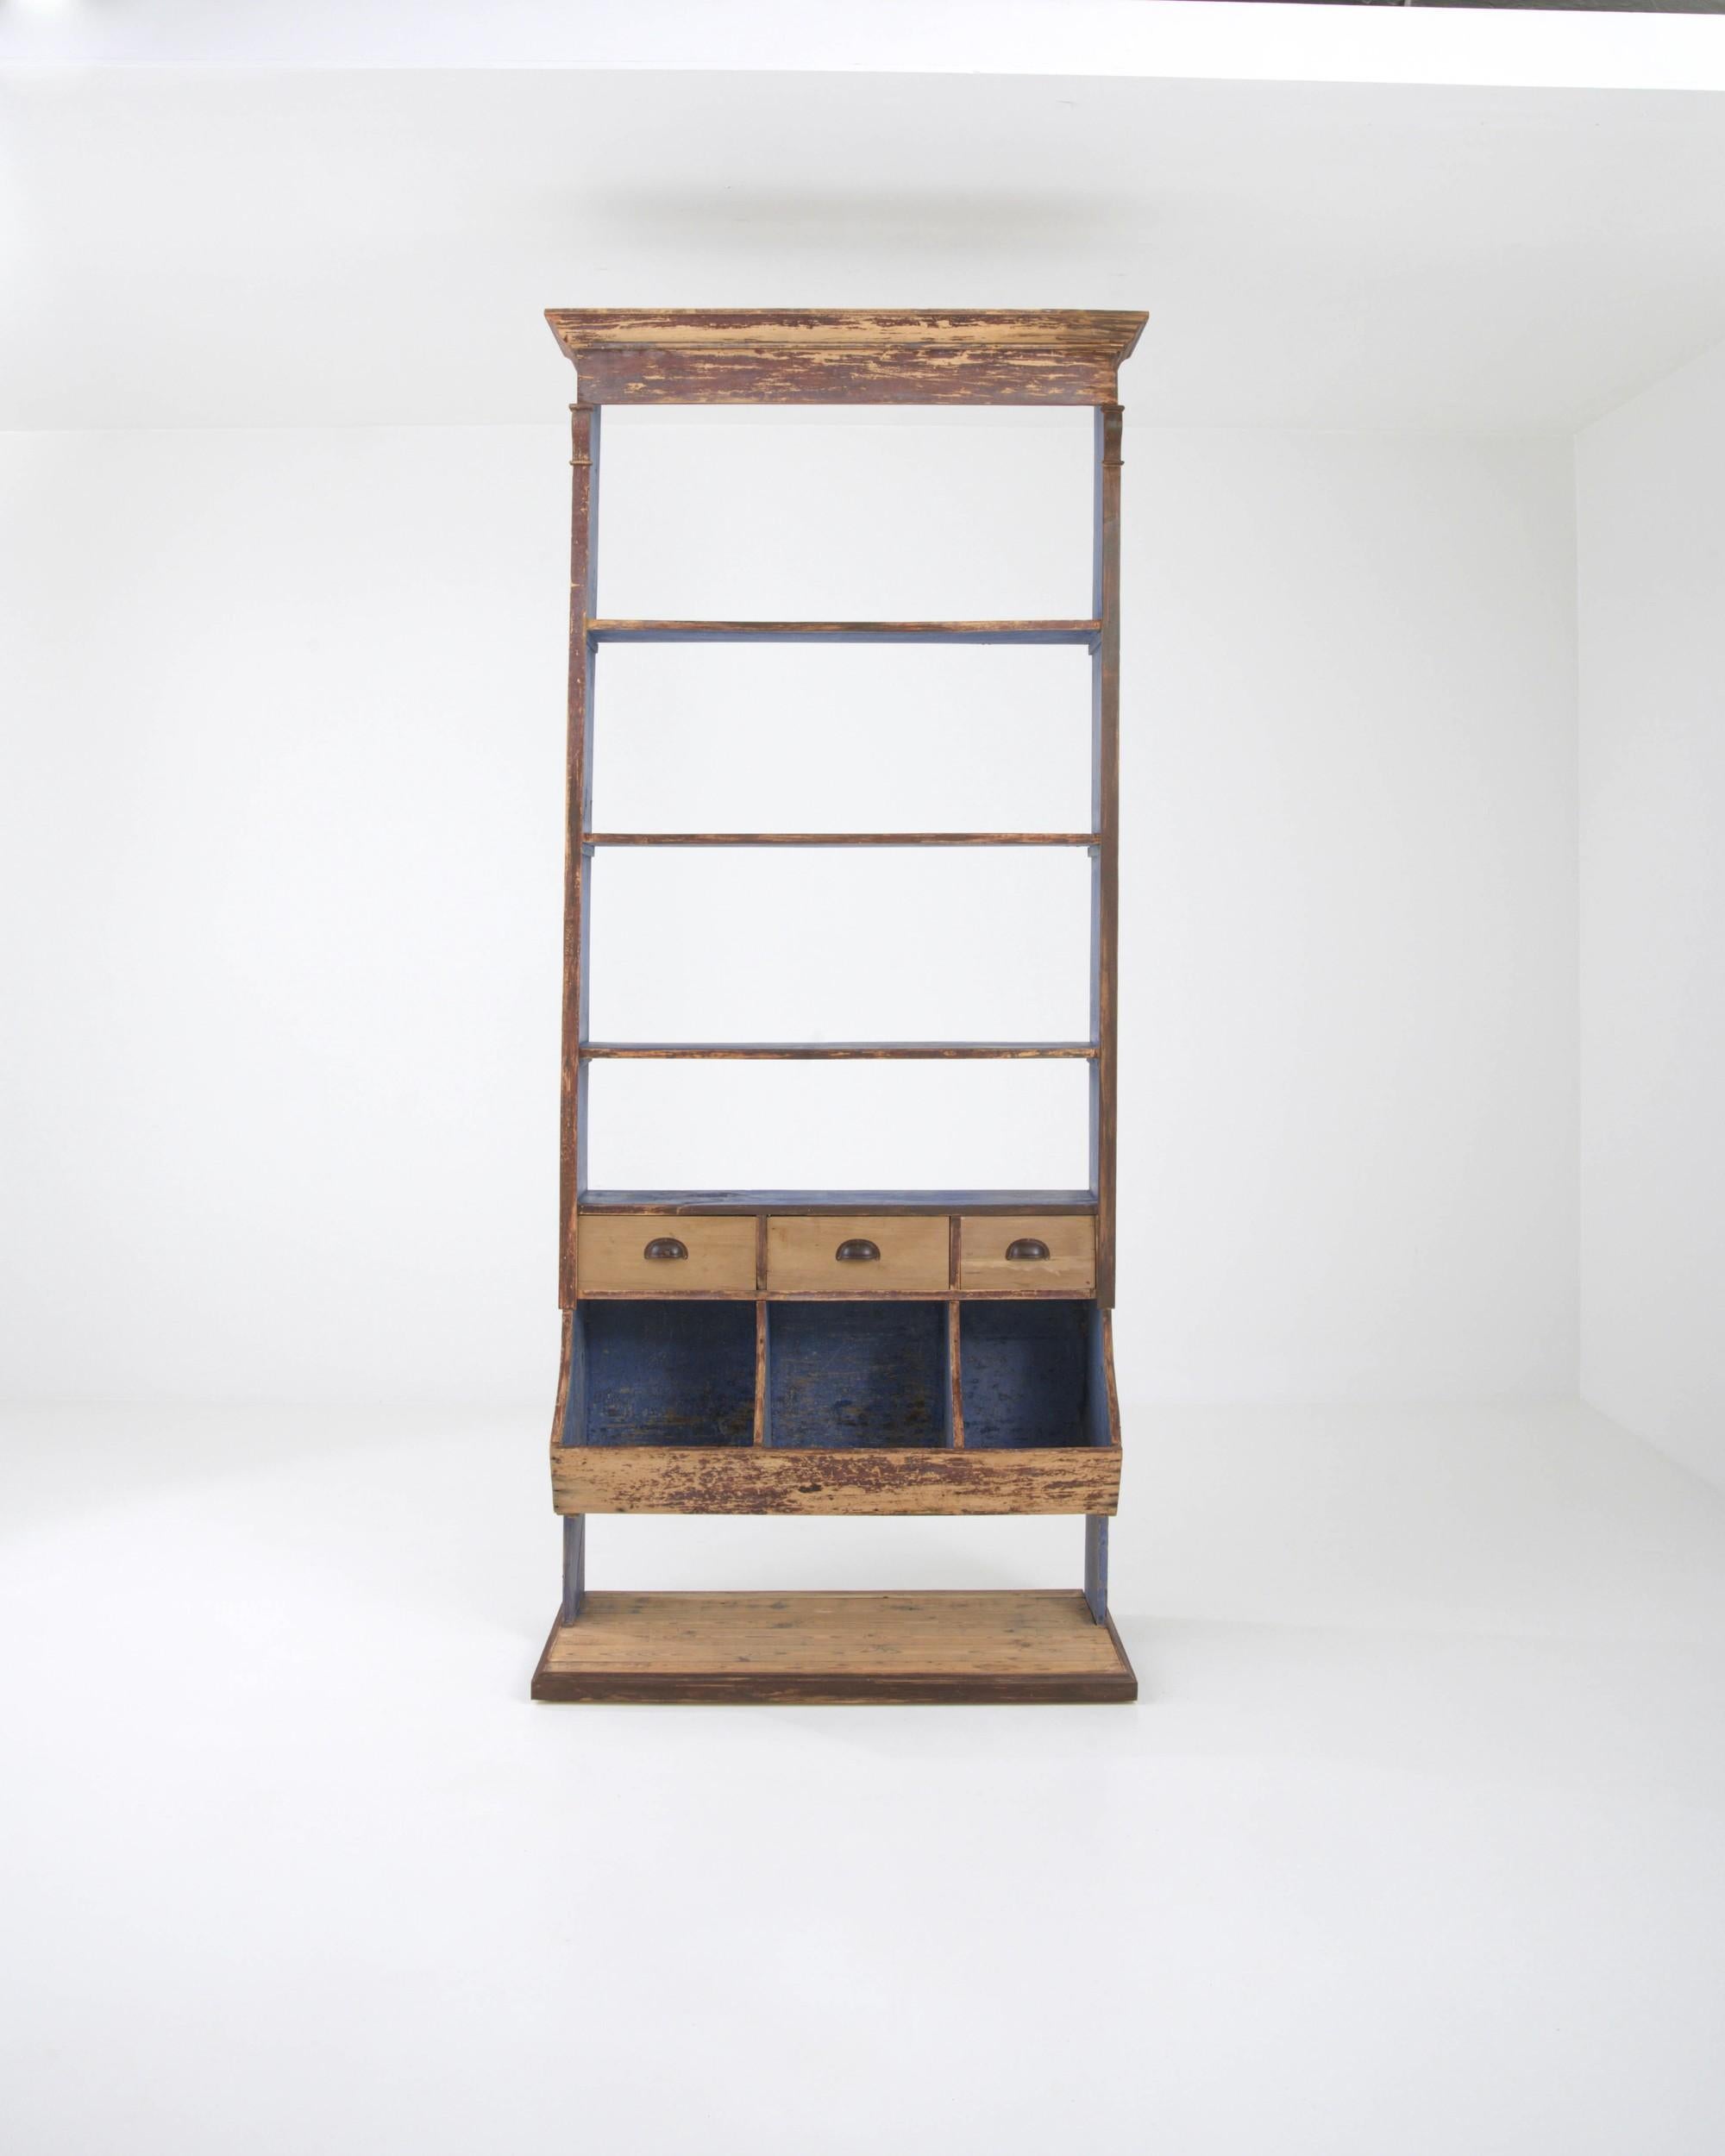 Handcrafted for commercial spaces, this tall wooden shelving unit originates from 19th-century France. Topped by an elegant crown, it features an upper compartment with ample shelves sitting atop a set of deep drawers, with three open sections for